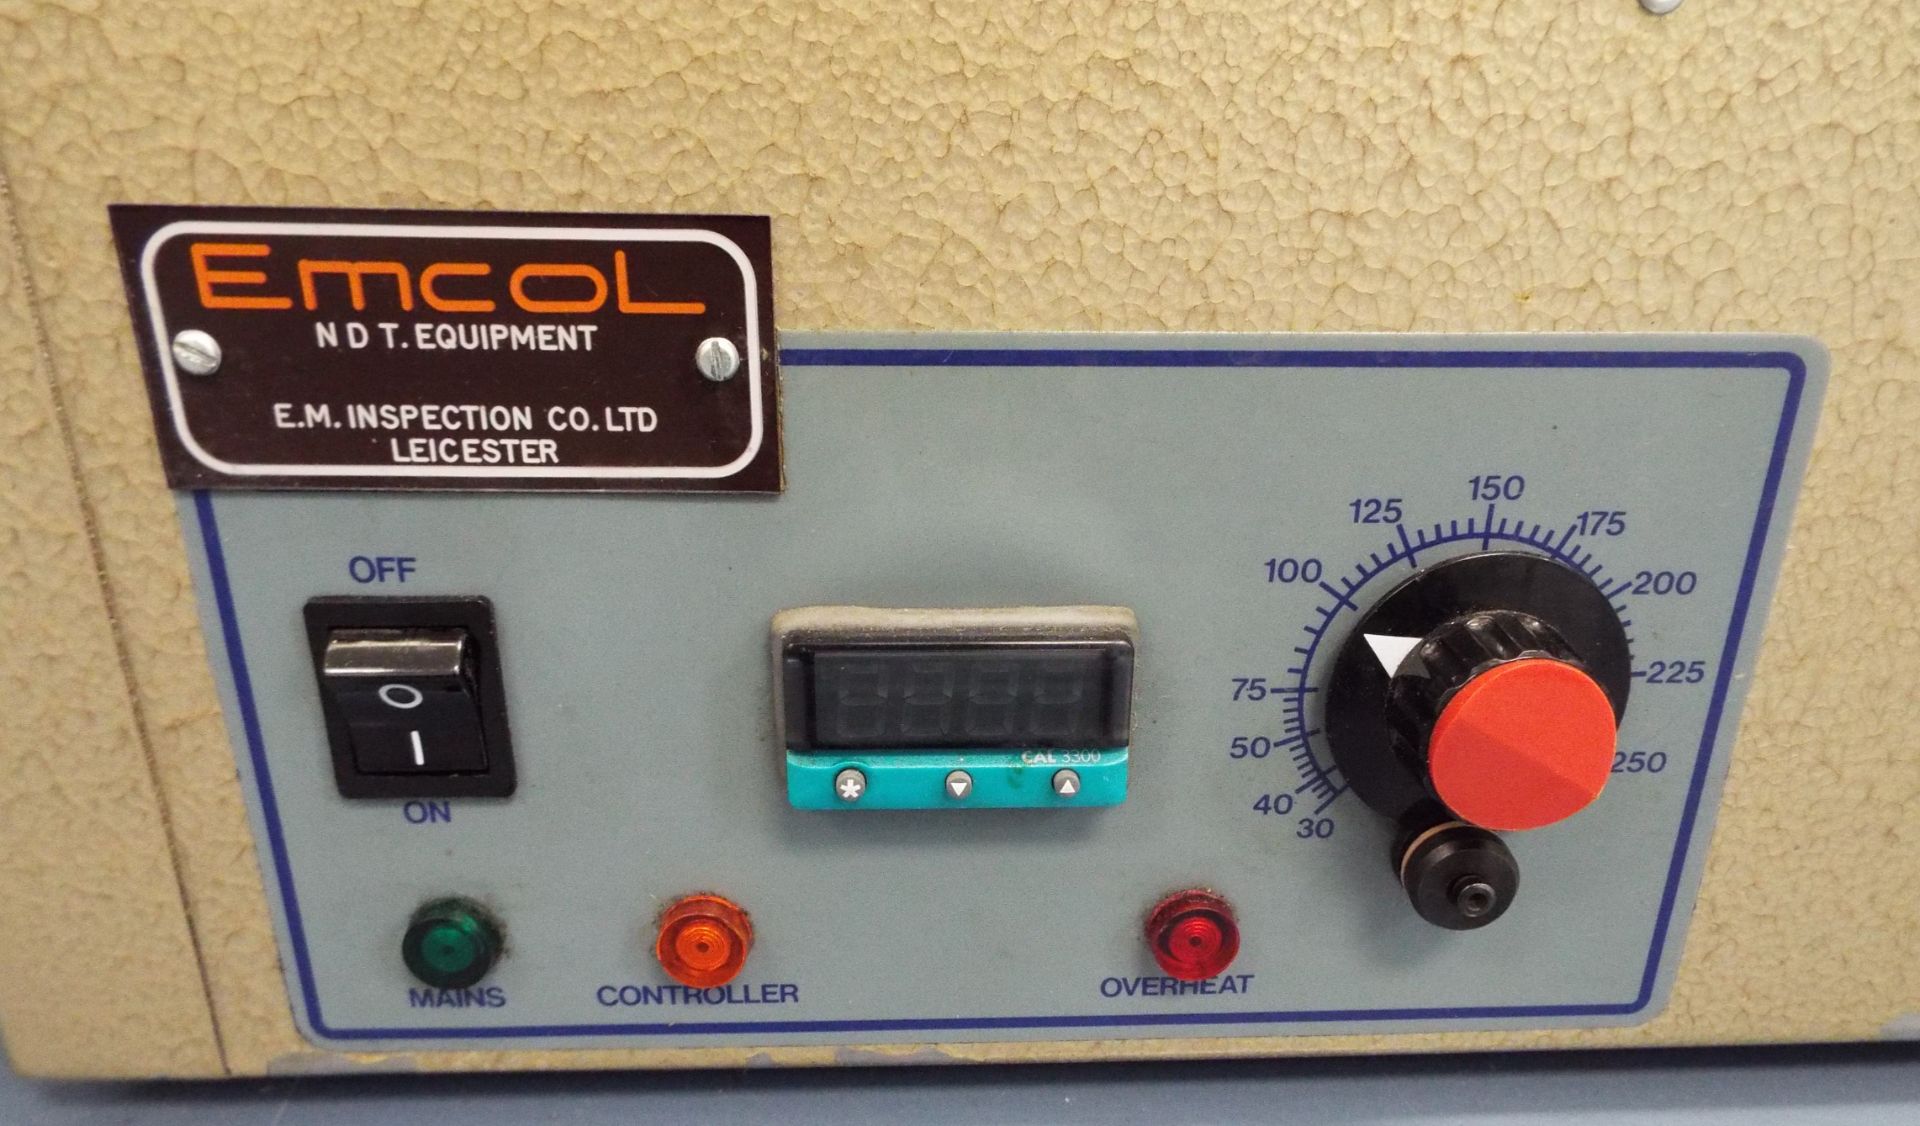 Emcol NDT Equipment Fan Assisted Lab Oven - 0-250 Deg C - Image 3 of 5